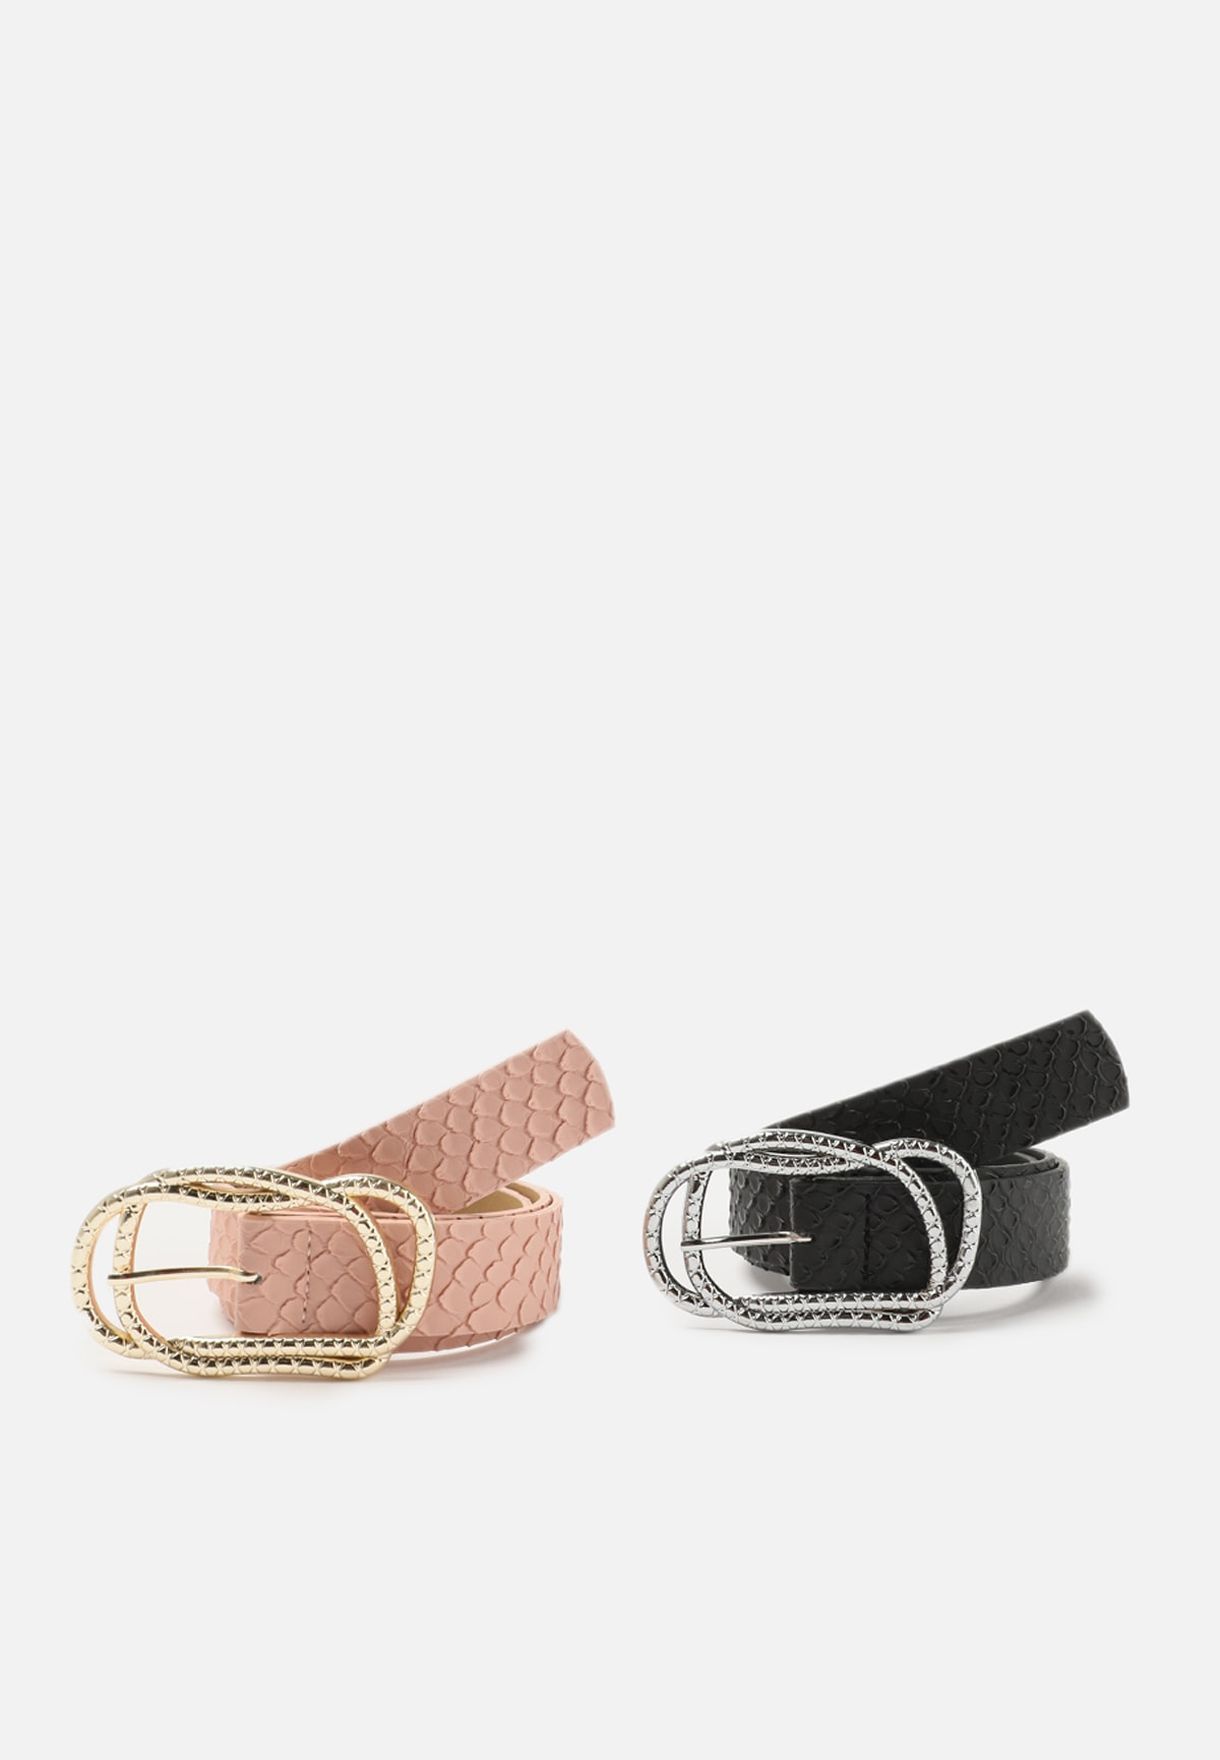 Allocated Hole Belts Set